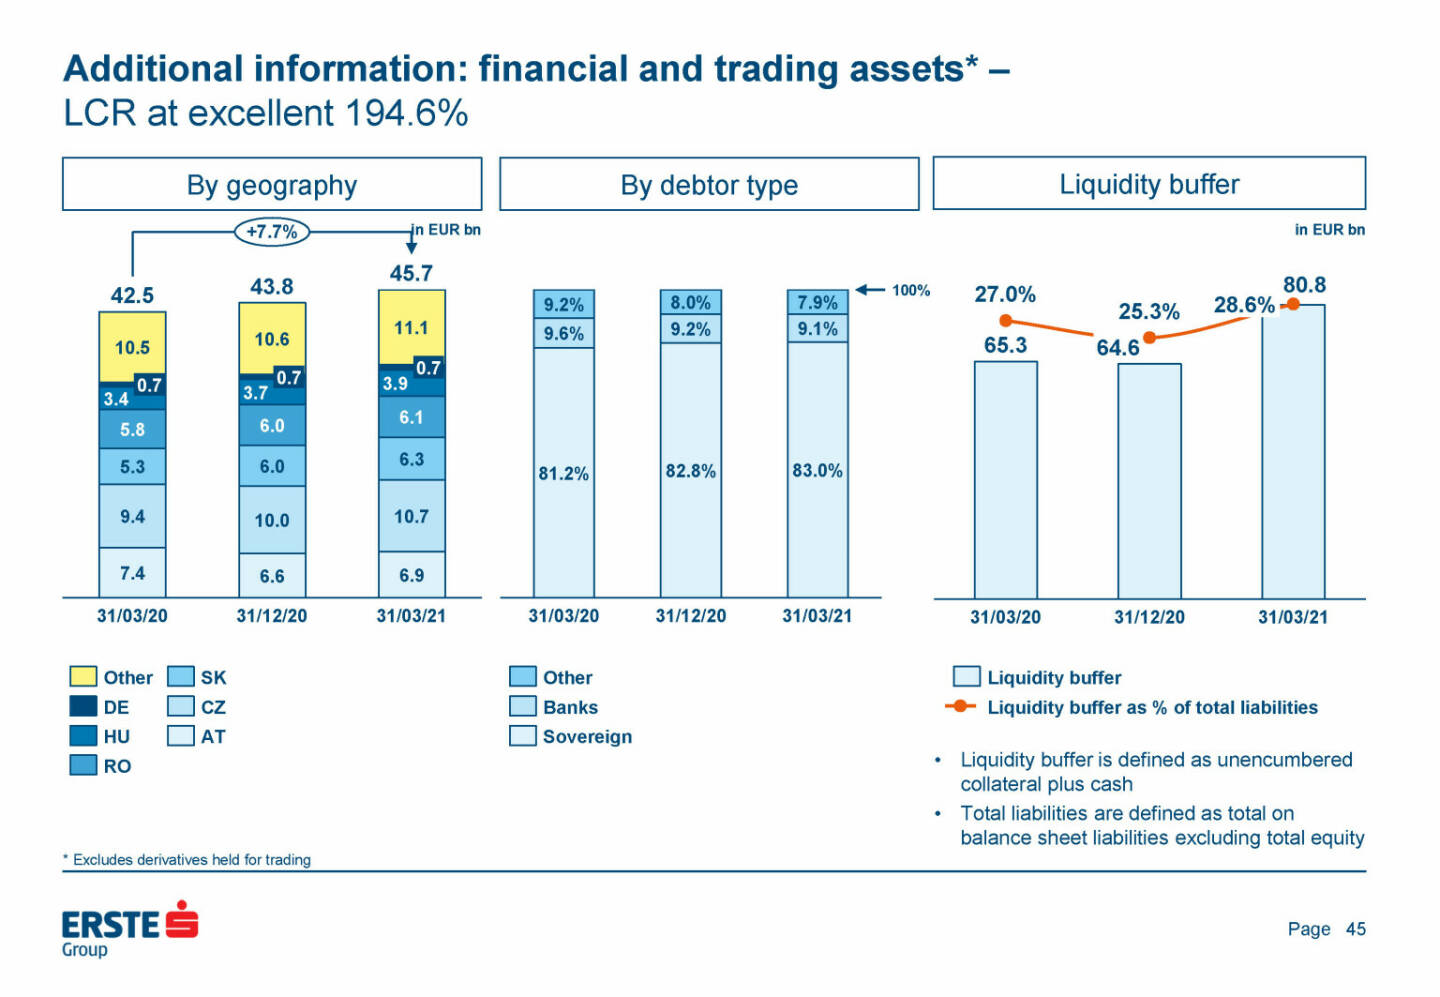 Erste Group - Additional information: financial and trading assets 